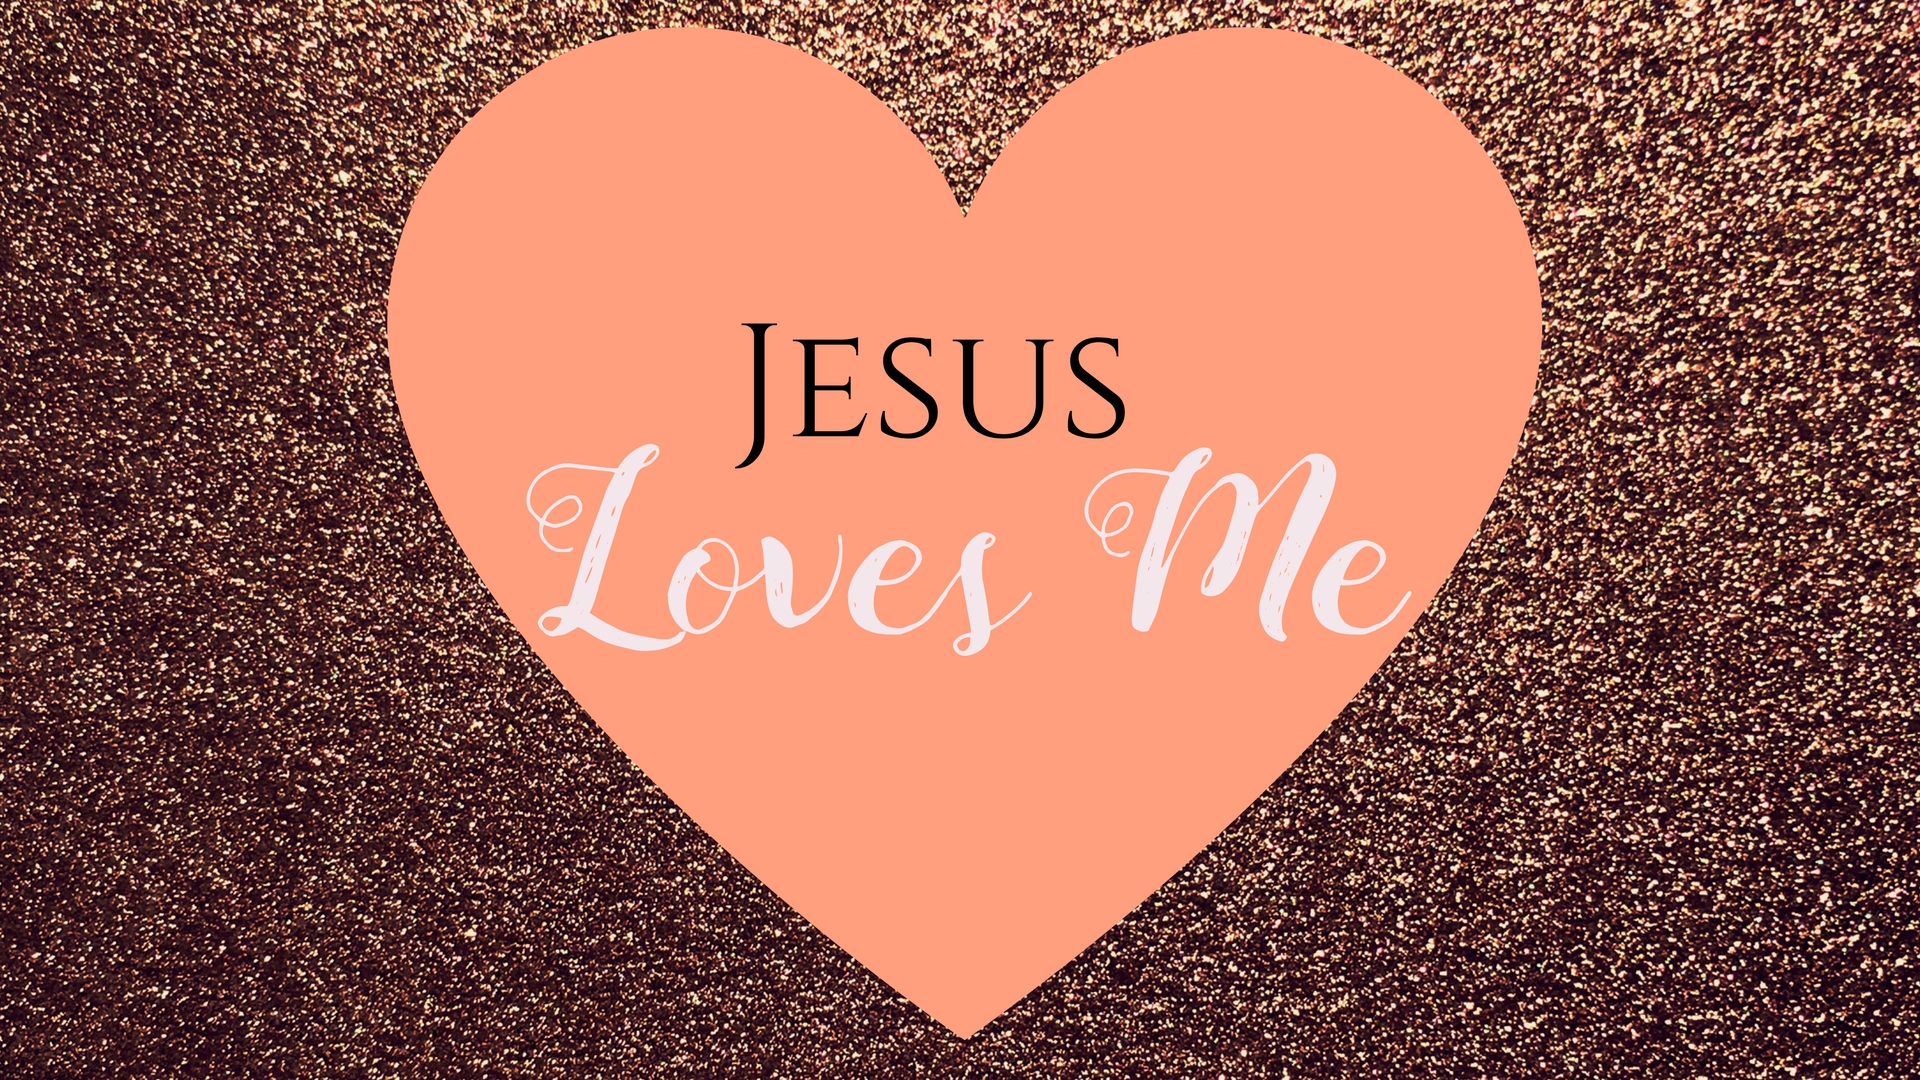 Jsus Loves You Christian Wallpaper Photo And Screensaver For Mobile Iphone  And Desktop | Christian Wallpapers